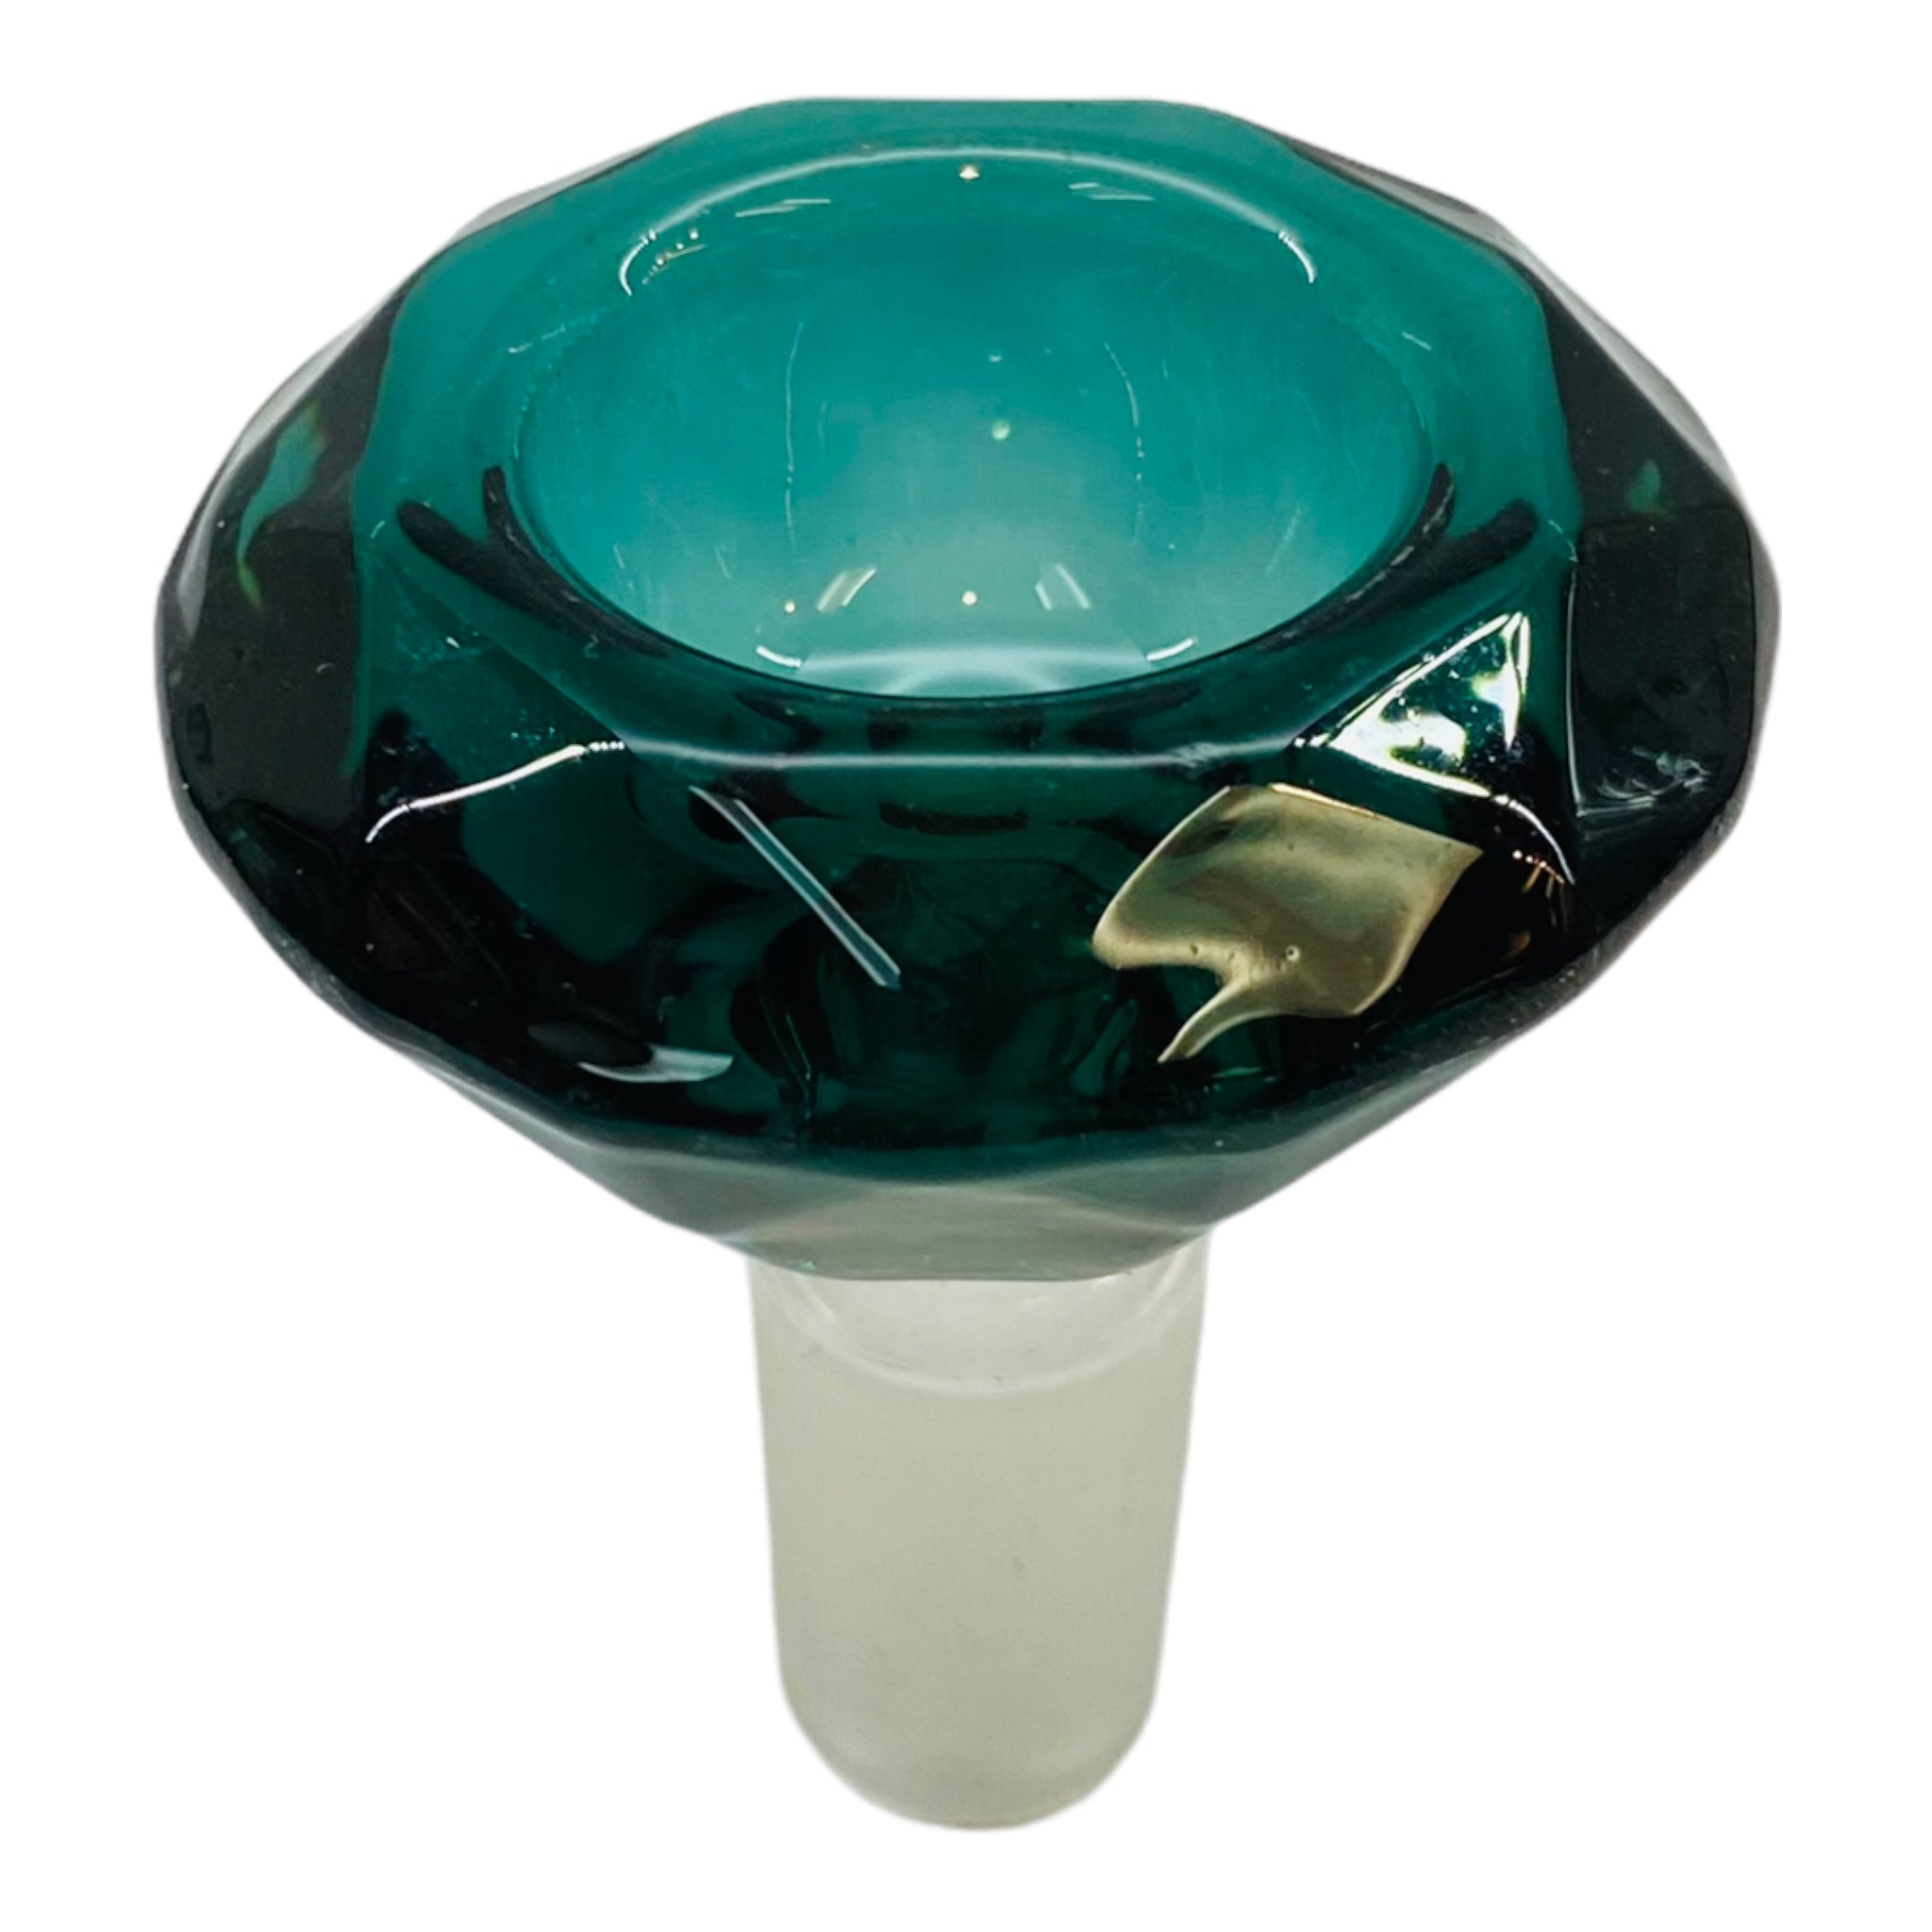 14mm Flower Bowl - Faceted Diamond Glass Bong Bowl Piece - Turquoise